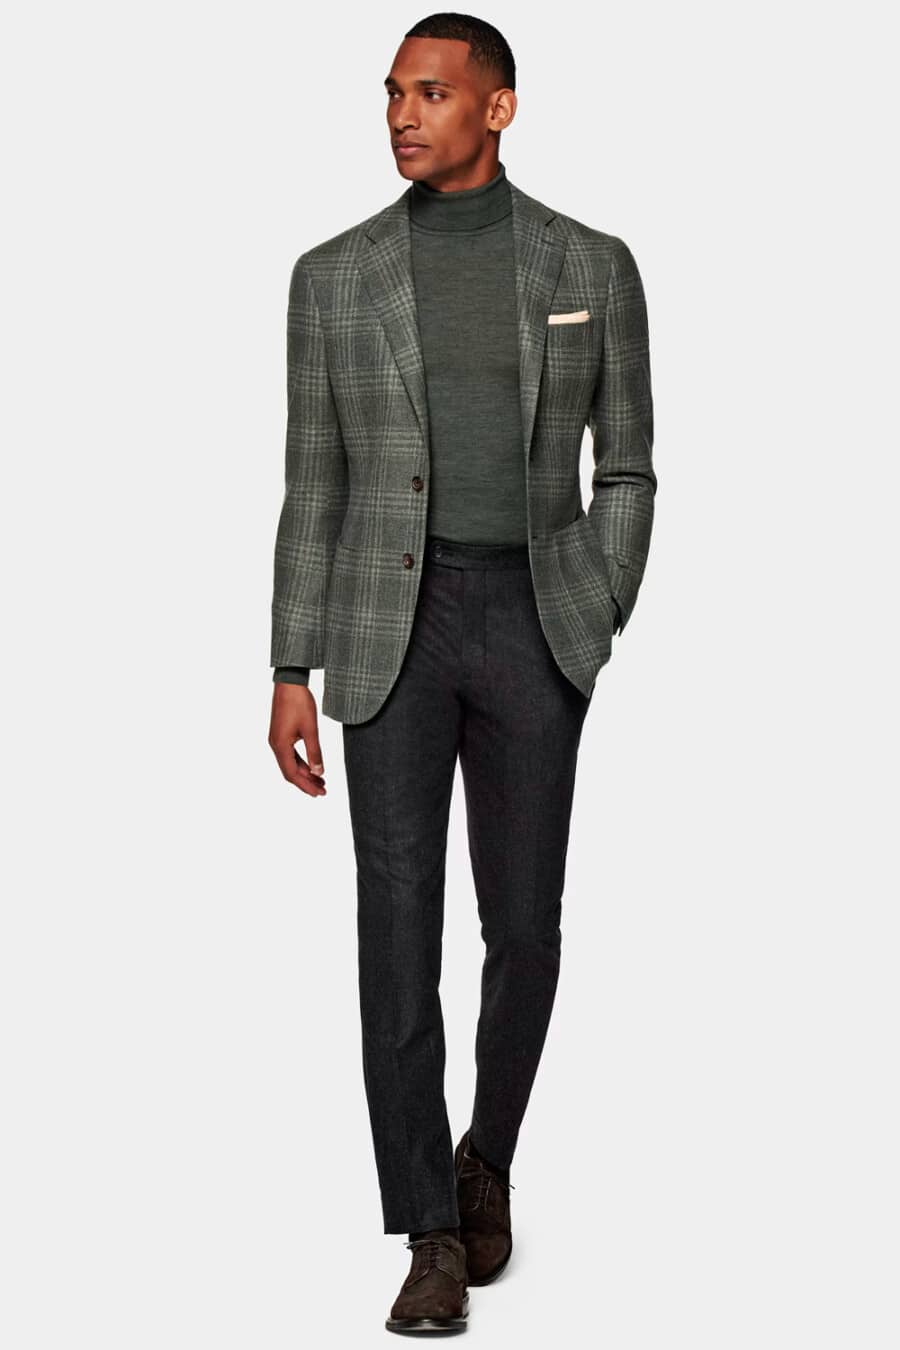 Men's charcoal flannel pants, charcoal turtleneck, charcoal check blazer and brown suede Derby shoes outfit